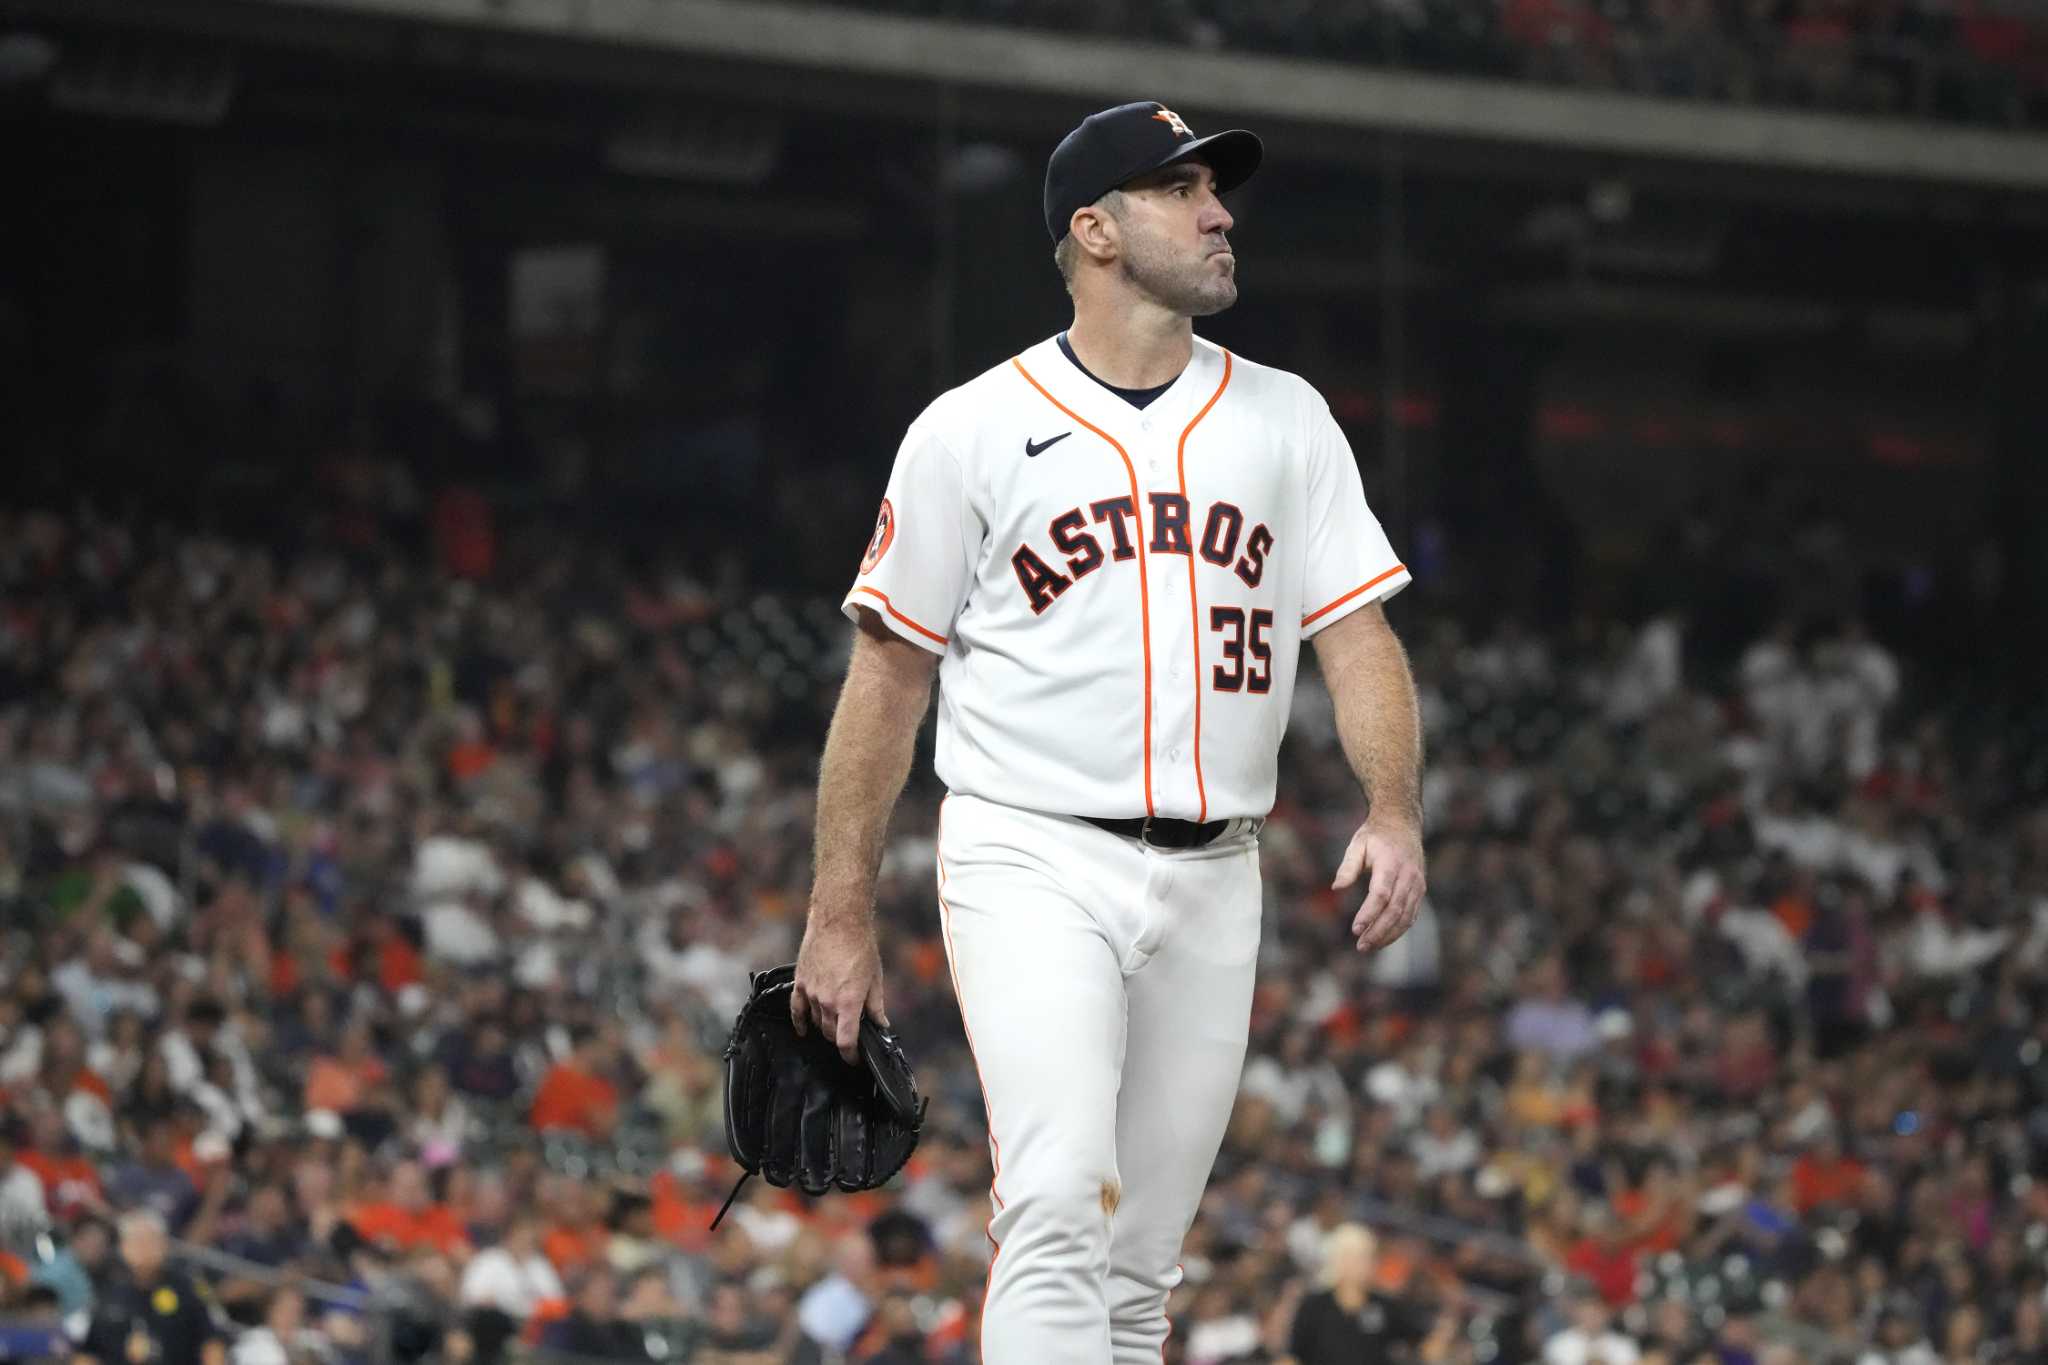 Former Texas Tech Pitcher Mushinski Gets Call-Up to Astros